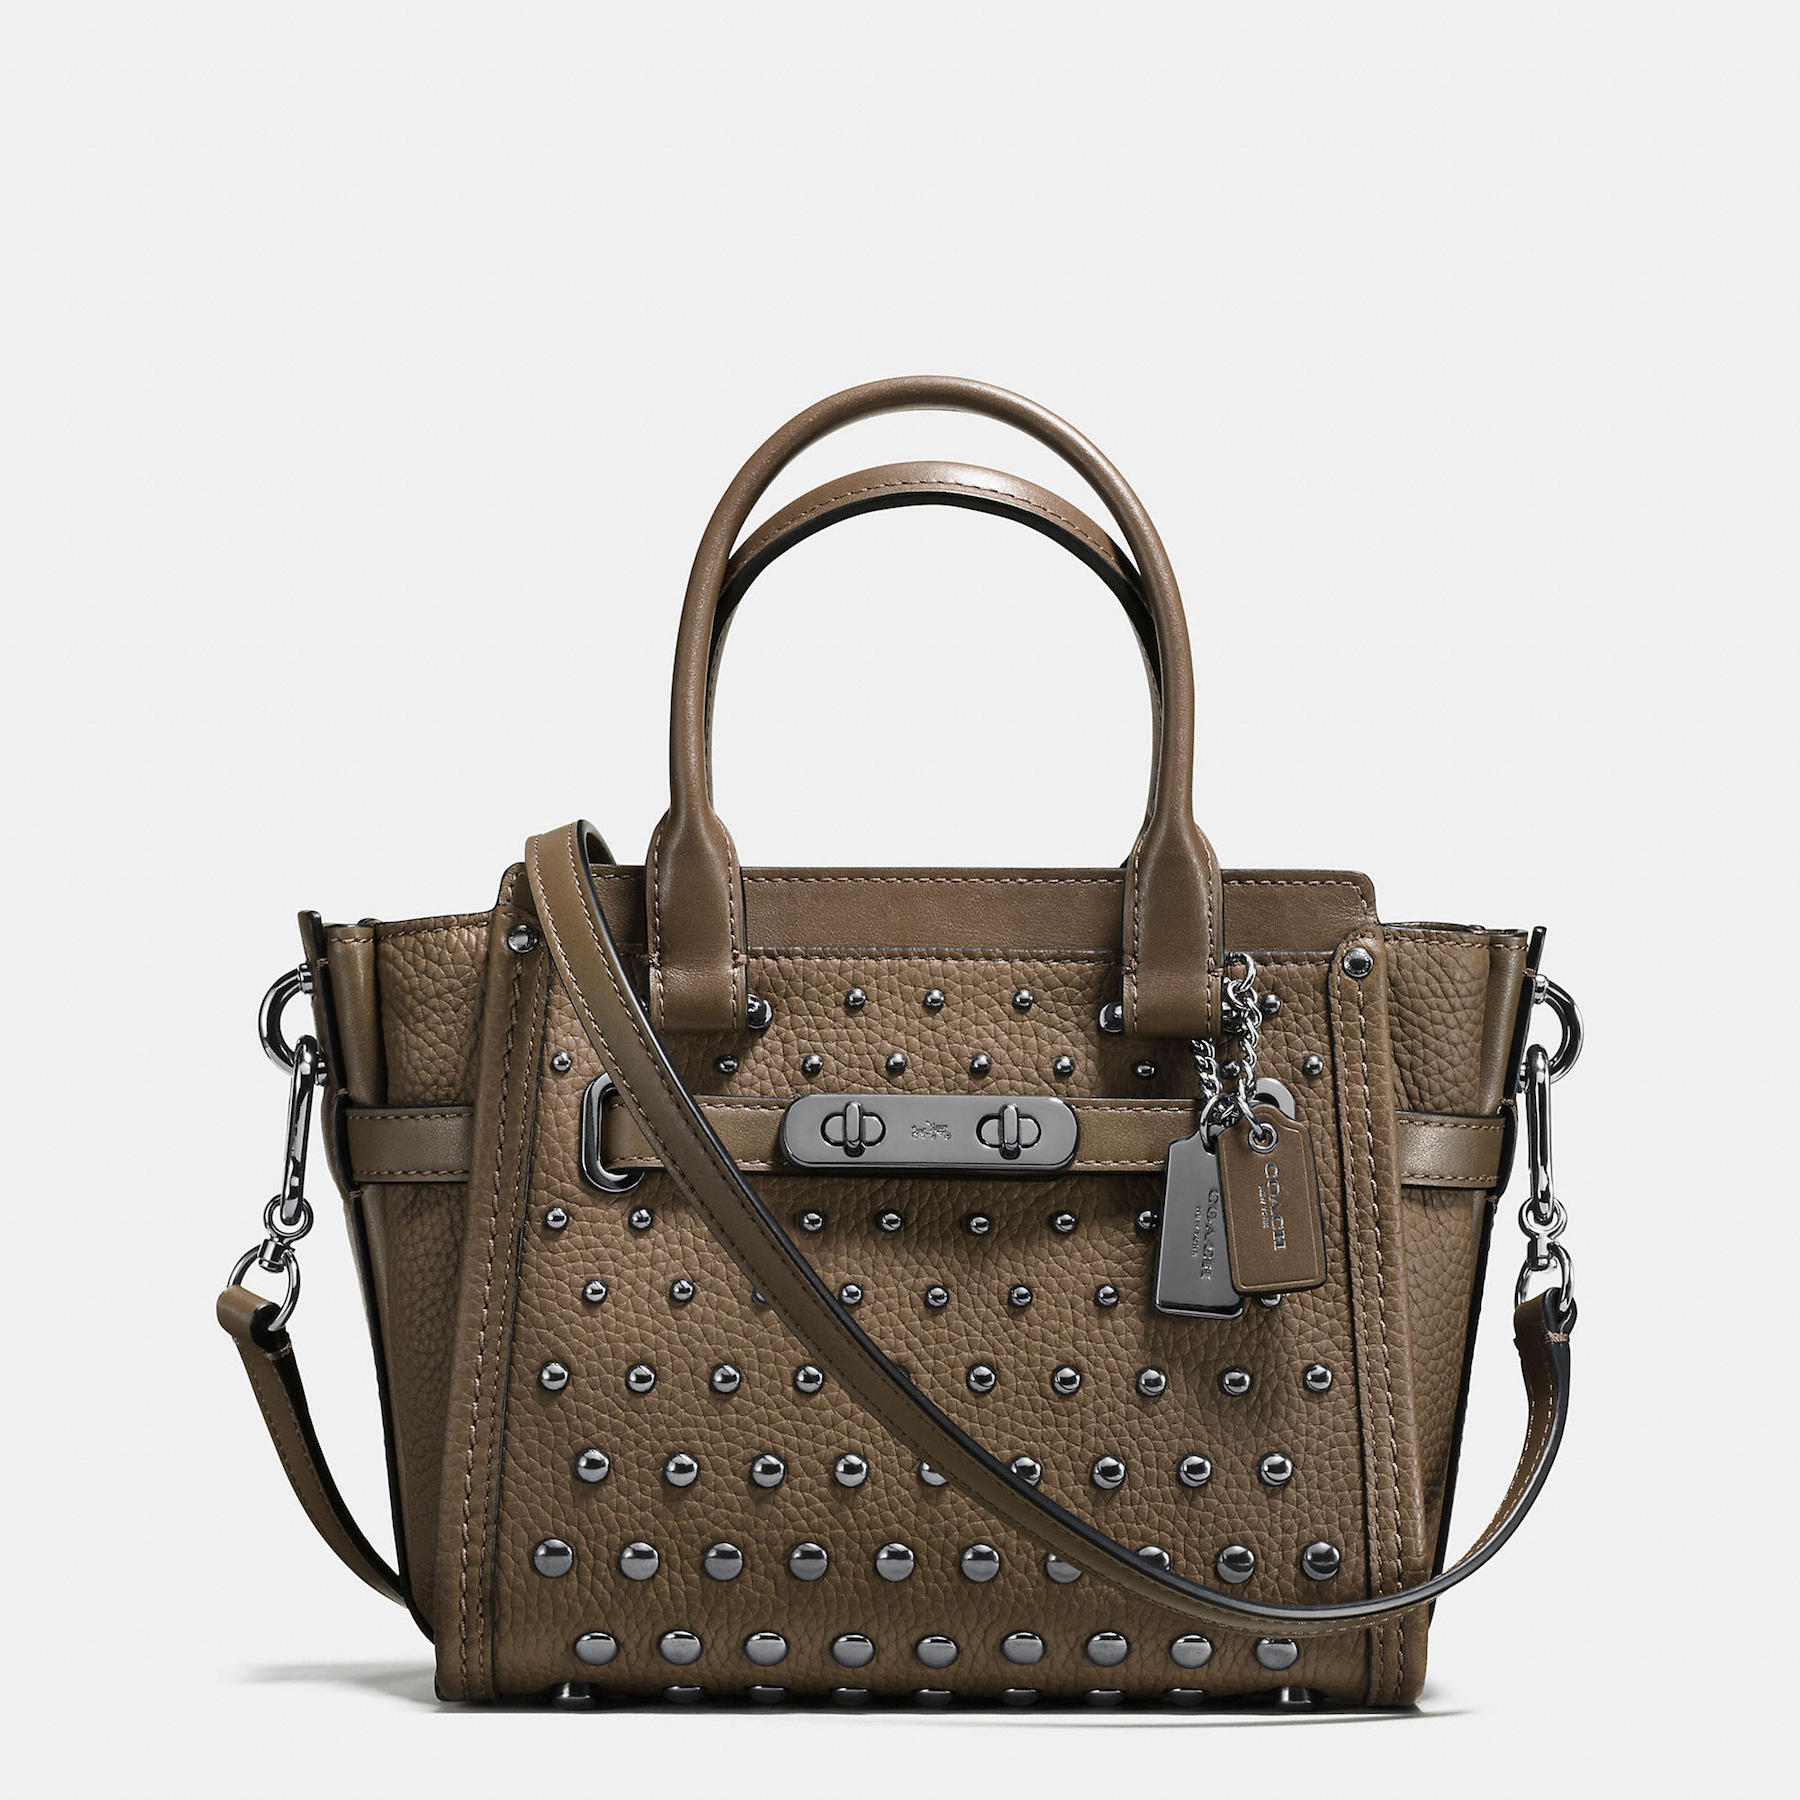 Coach Swagger 21 in pebbled leather with ombre rivets